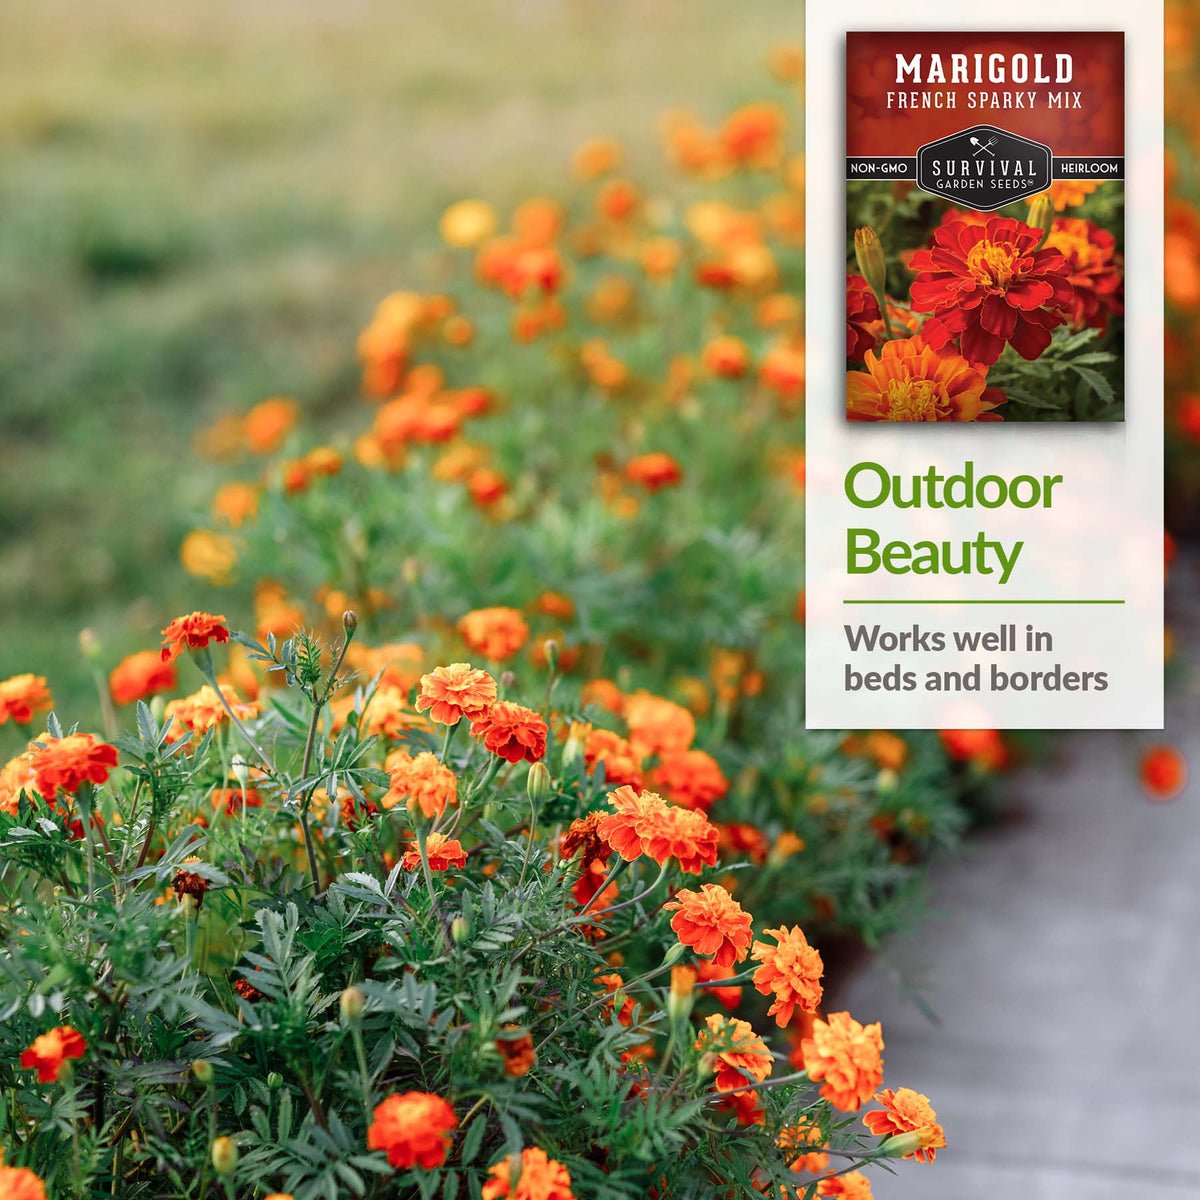 Marigolds work well in beds and borders